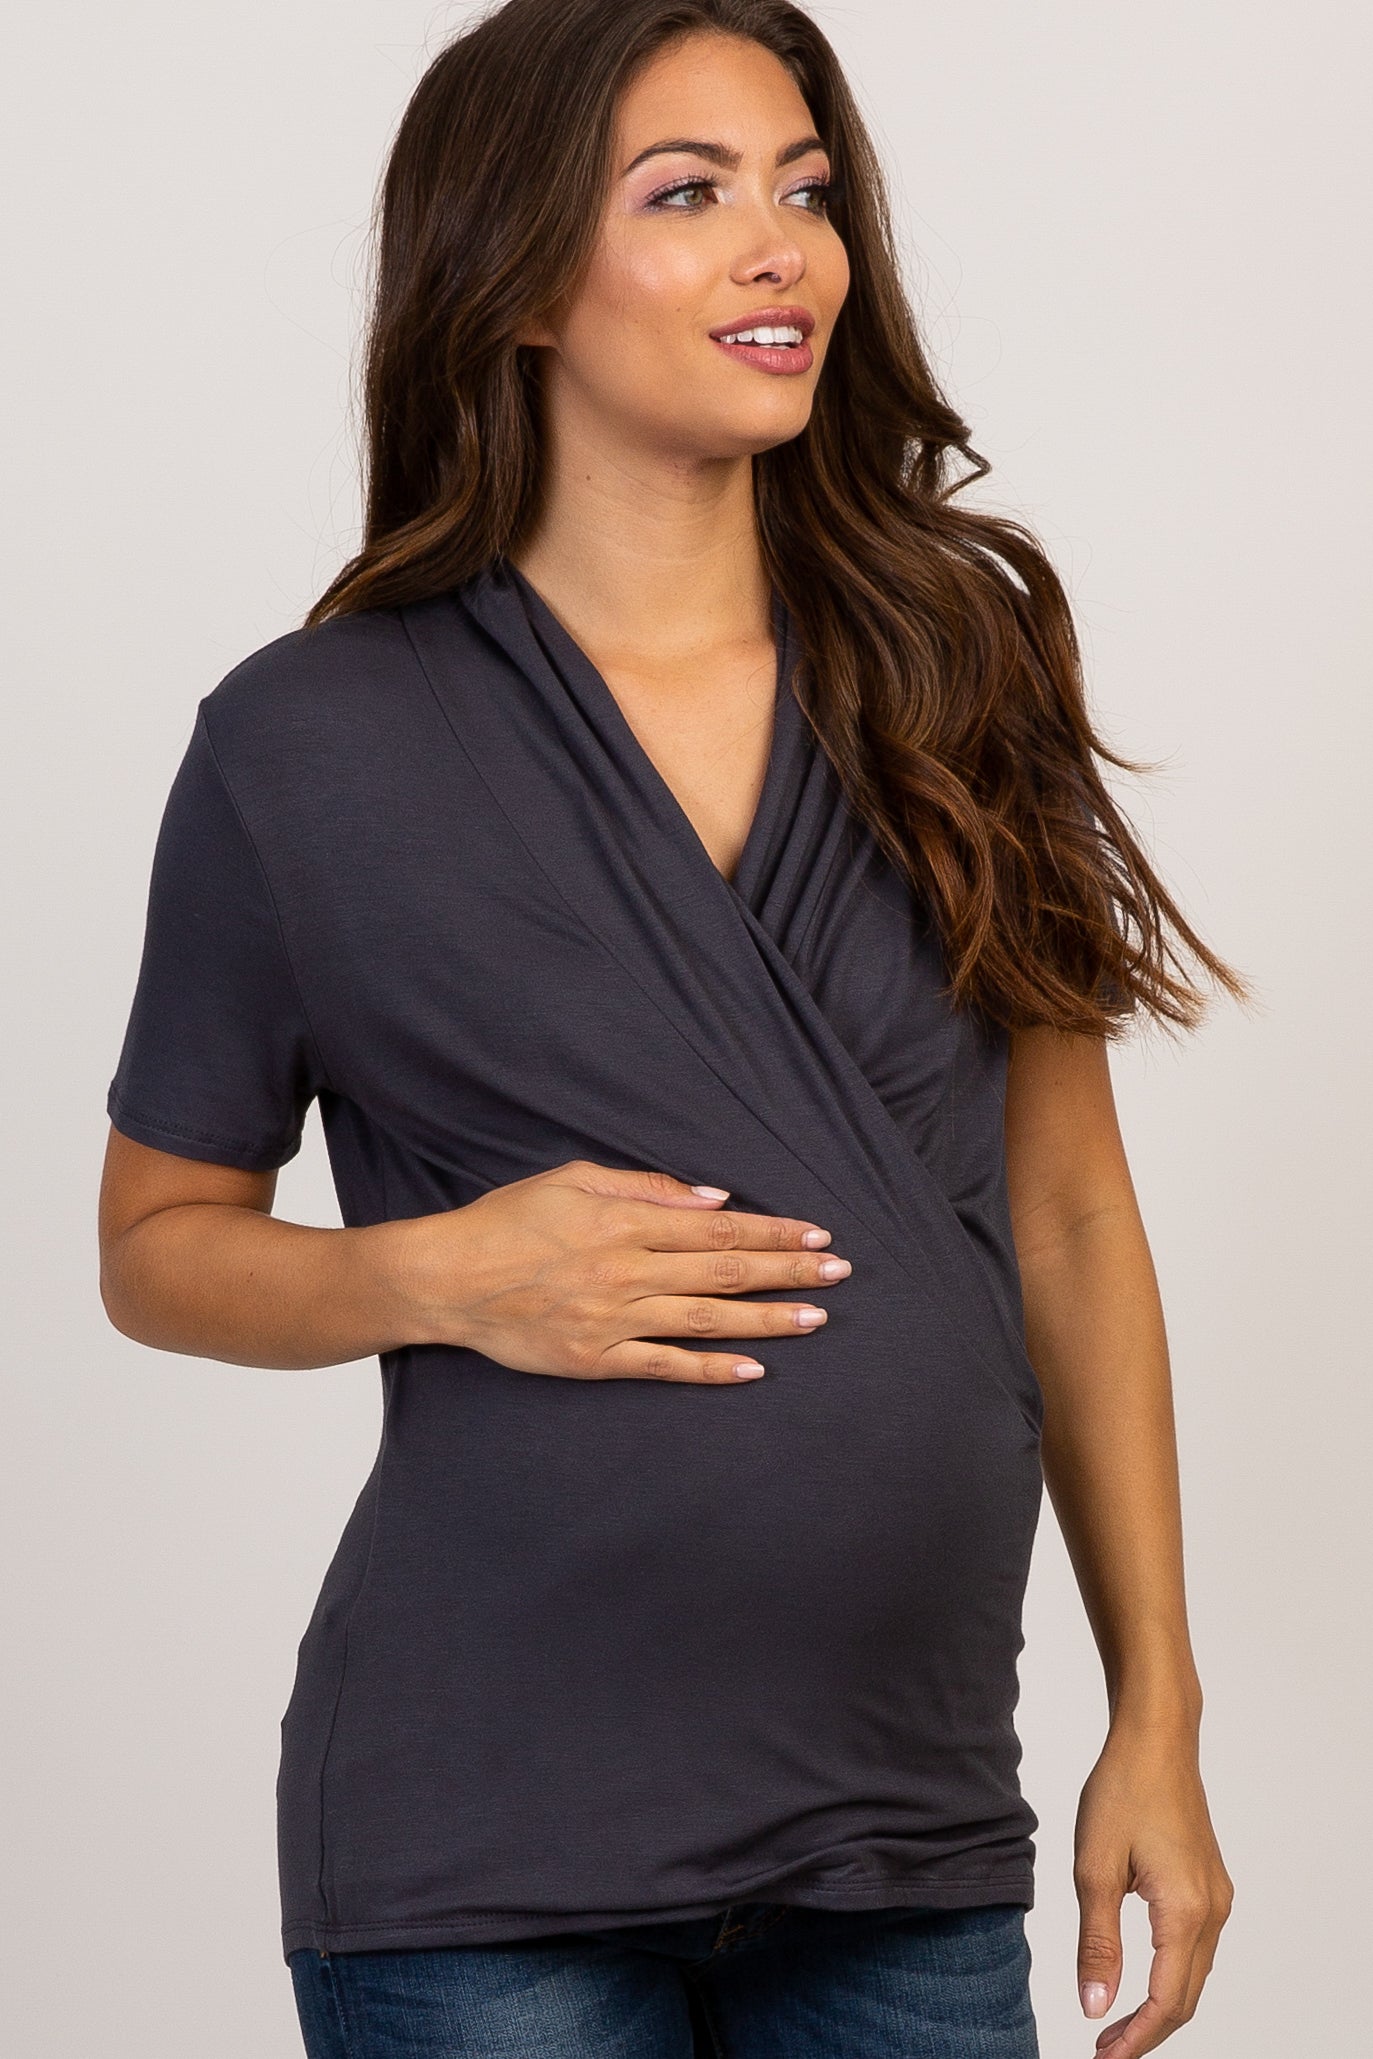 Charcoal Solid Short Sleeve Wrap Front Maternity/Nursing Top– PinkBlush